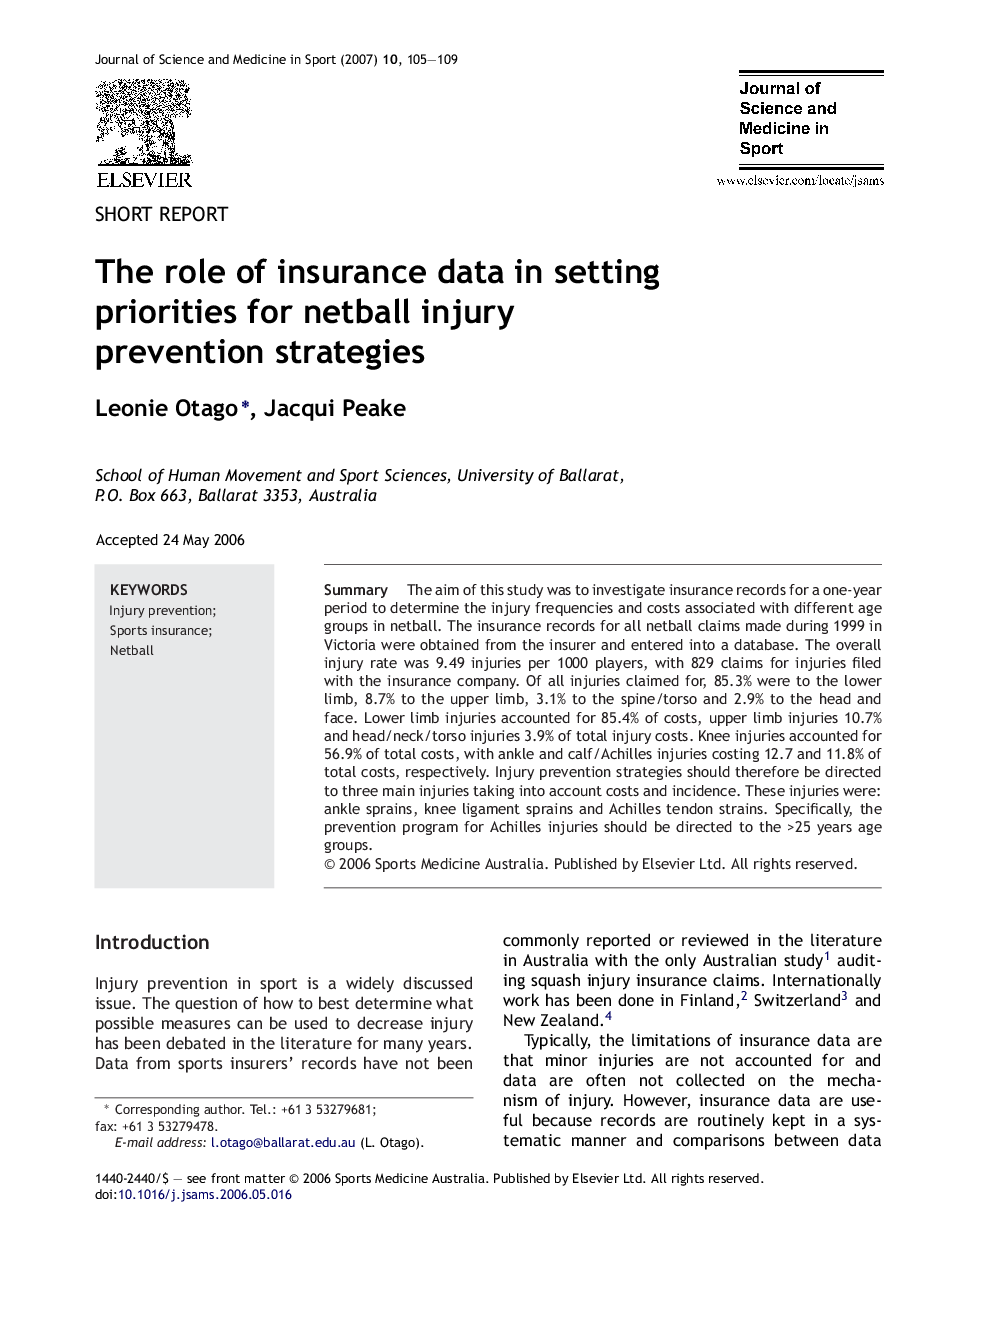 The role of insurance data in setting priorities for netball injury prevention strategies